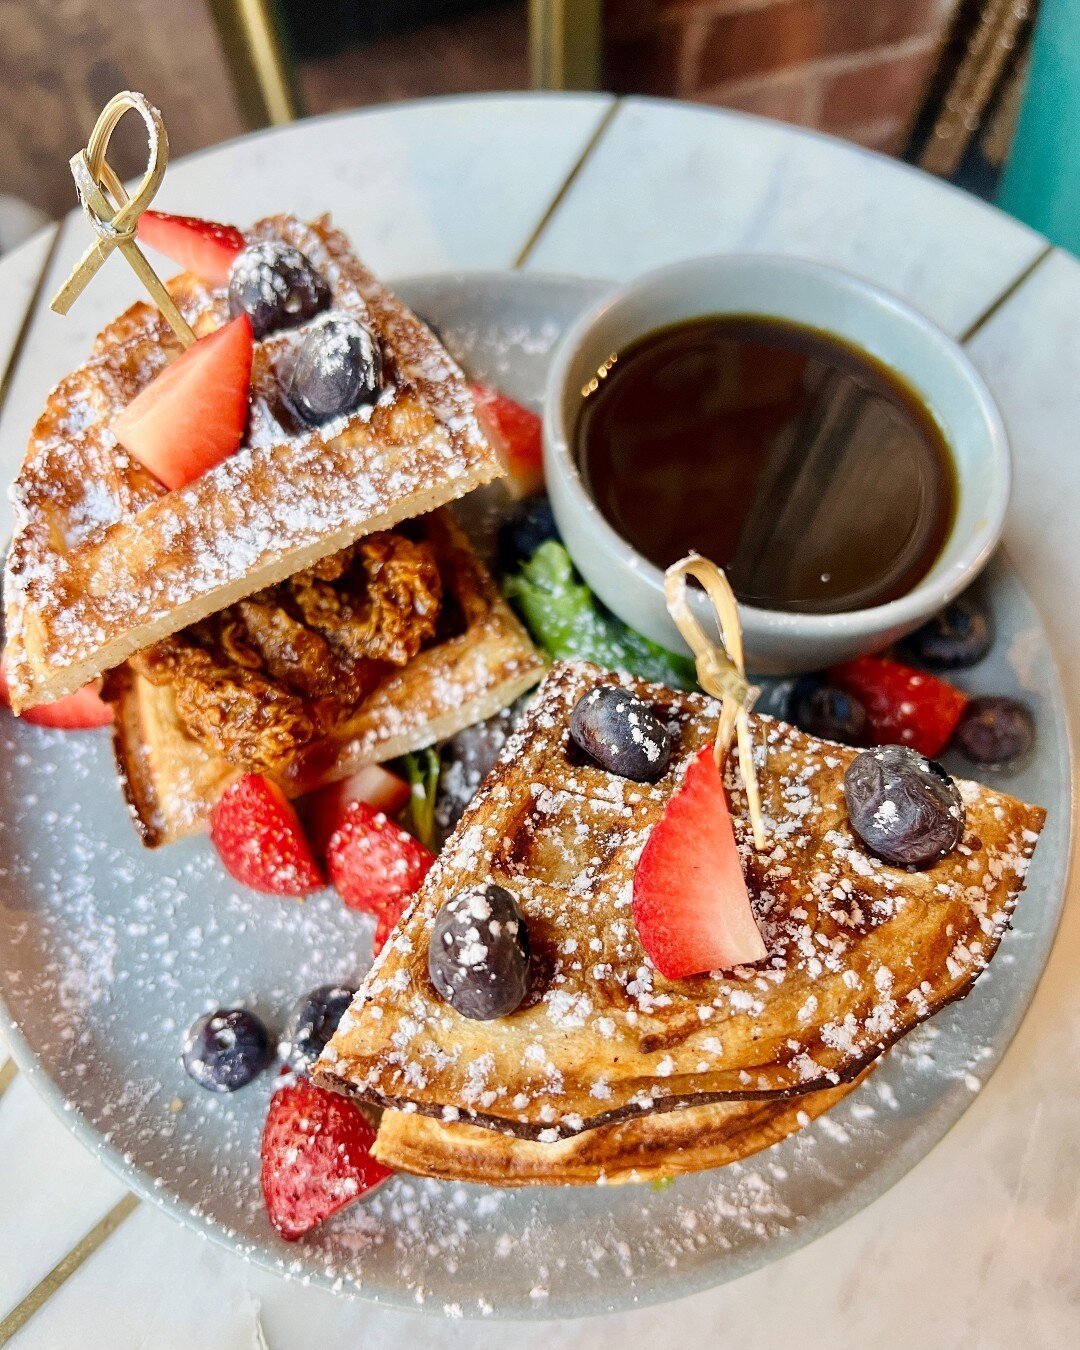 Hop on over to Dewey's for A Gospel Brunch with SimoneMon&eacute; The Melodist, happening on #EasterSunday, March 31st! 🐰 🎶 

We'll be offering an All You Can Eat Brunch Buffet ($35/person), which includes:
🌷 Firecracker Chicken &amp; Waffle Slide